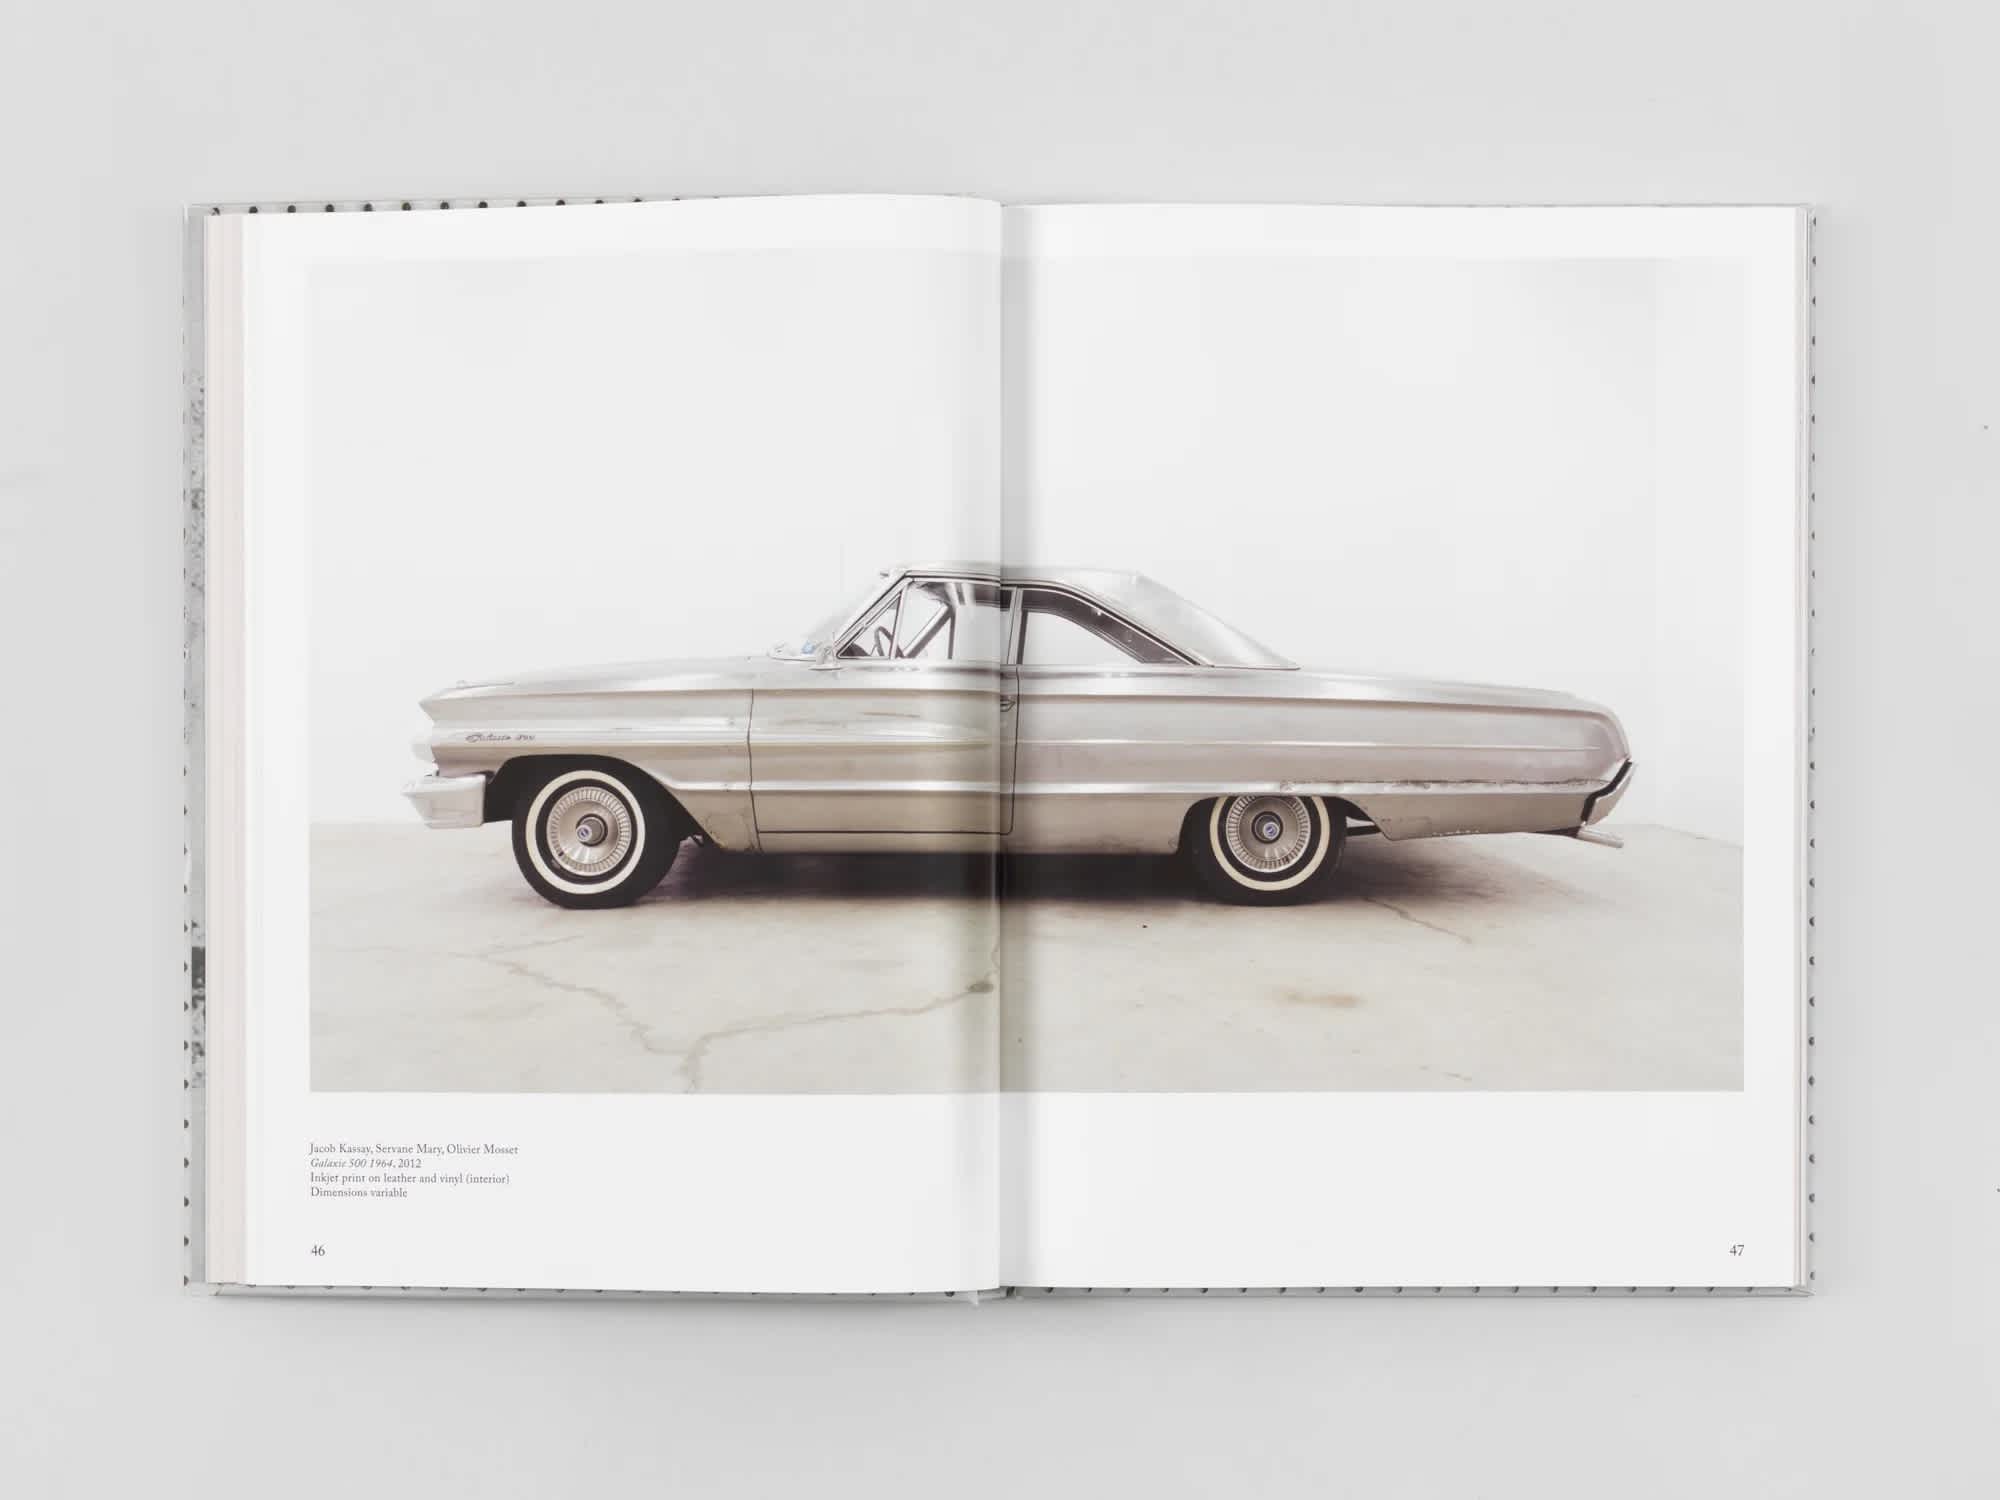 Open book with a centerfold image of a silver car.